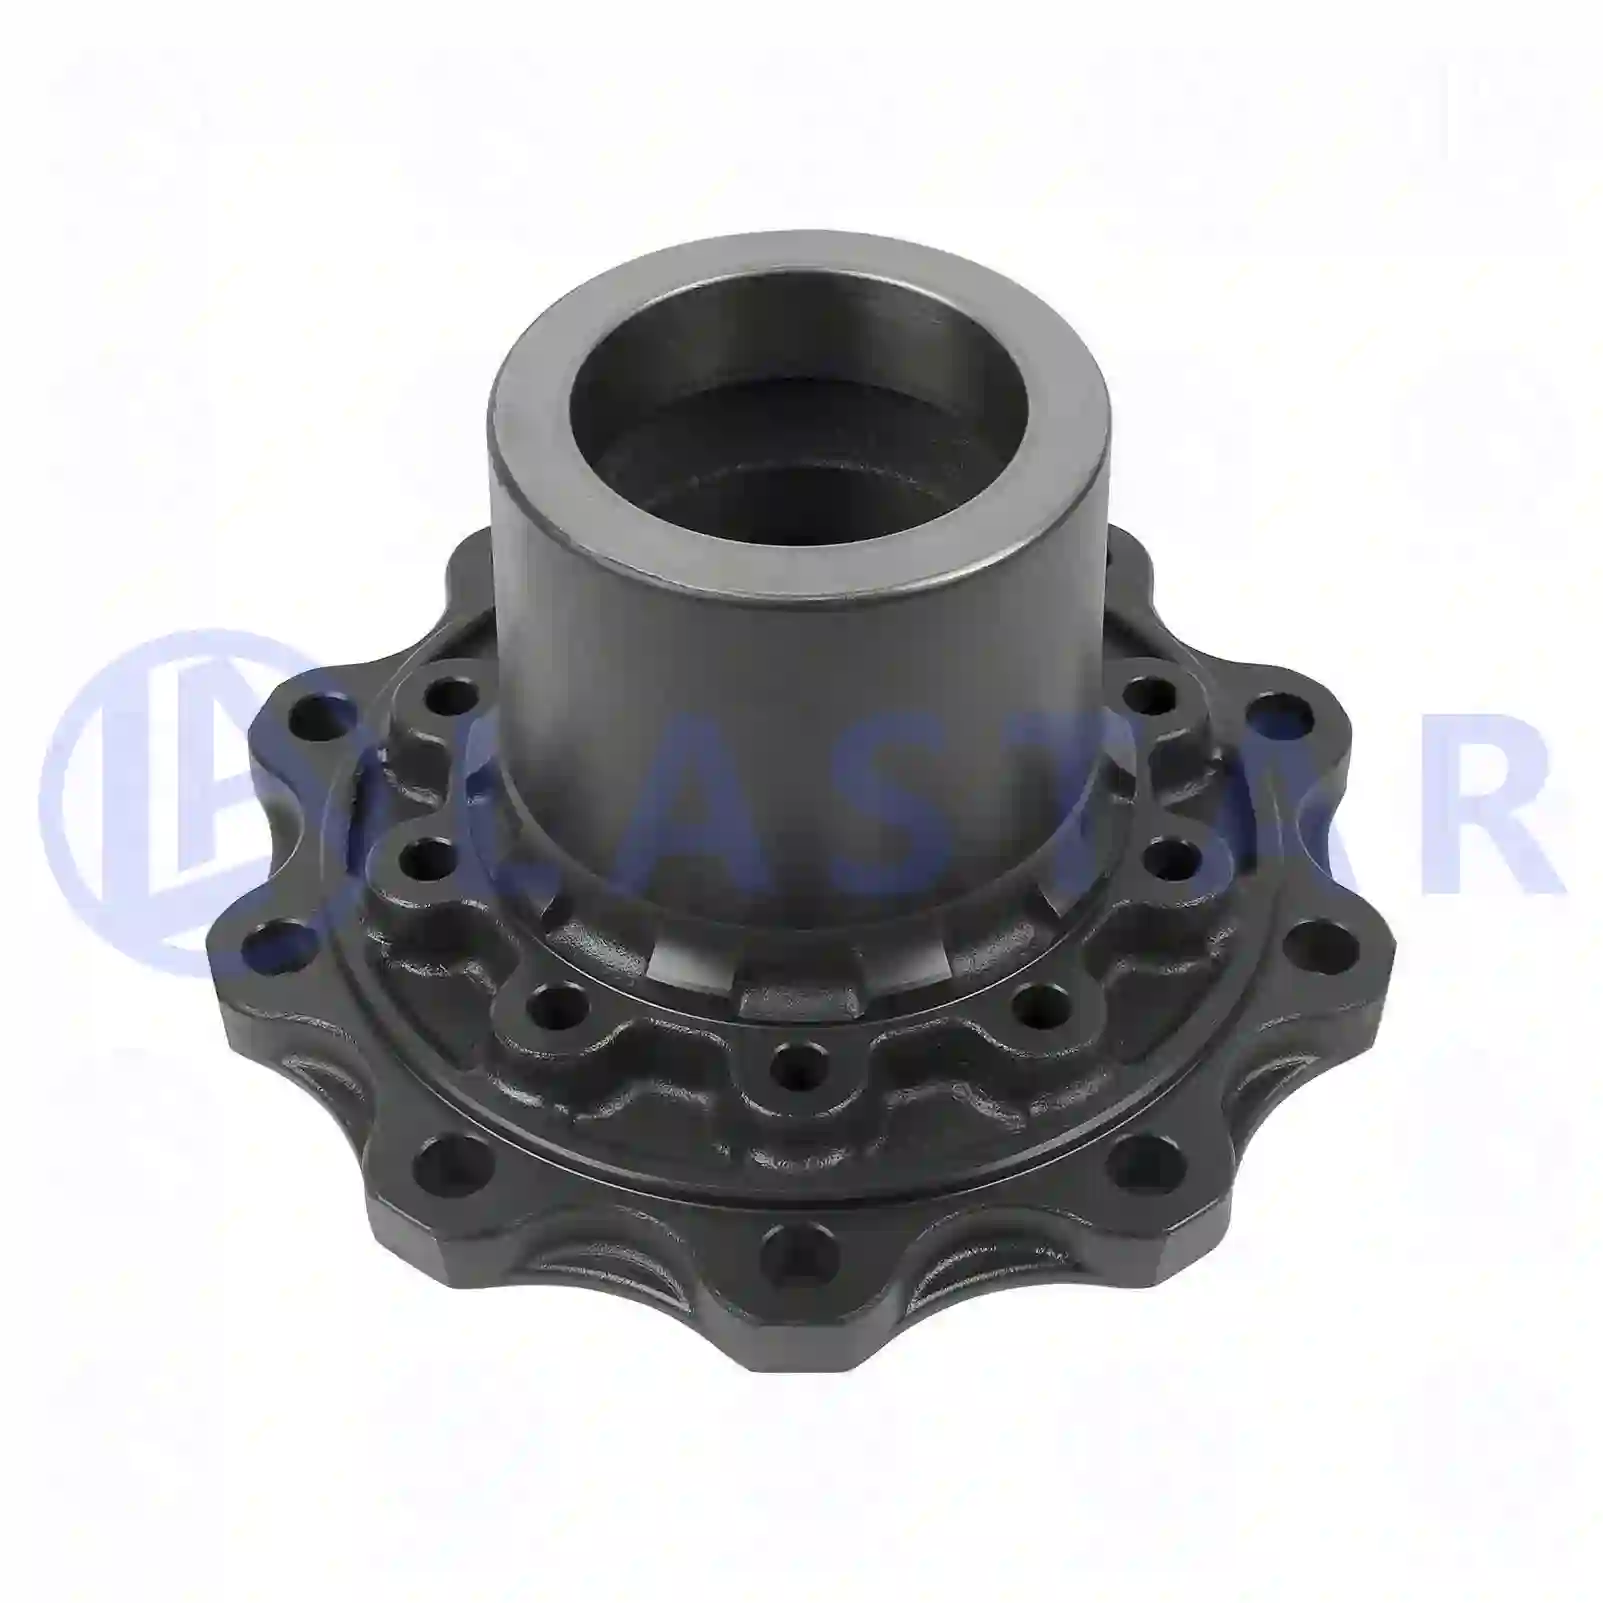 Wheel hub, without bearings, 77726961, 1864430, 2290526, 2603321, ZG30224-0008, , , ||  77726961 Lastar Spare Part | Truck Spare Parts, Auotomotive Spare Parts Wheel hub, without bearings, 77726961, 1864430, 2290526, 2603321, ZG30224-0008, , , ||  77726961 Lastar Spare Part | Truck Spare Parts, Auotomotive Spare Parts